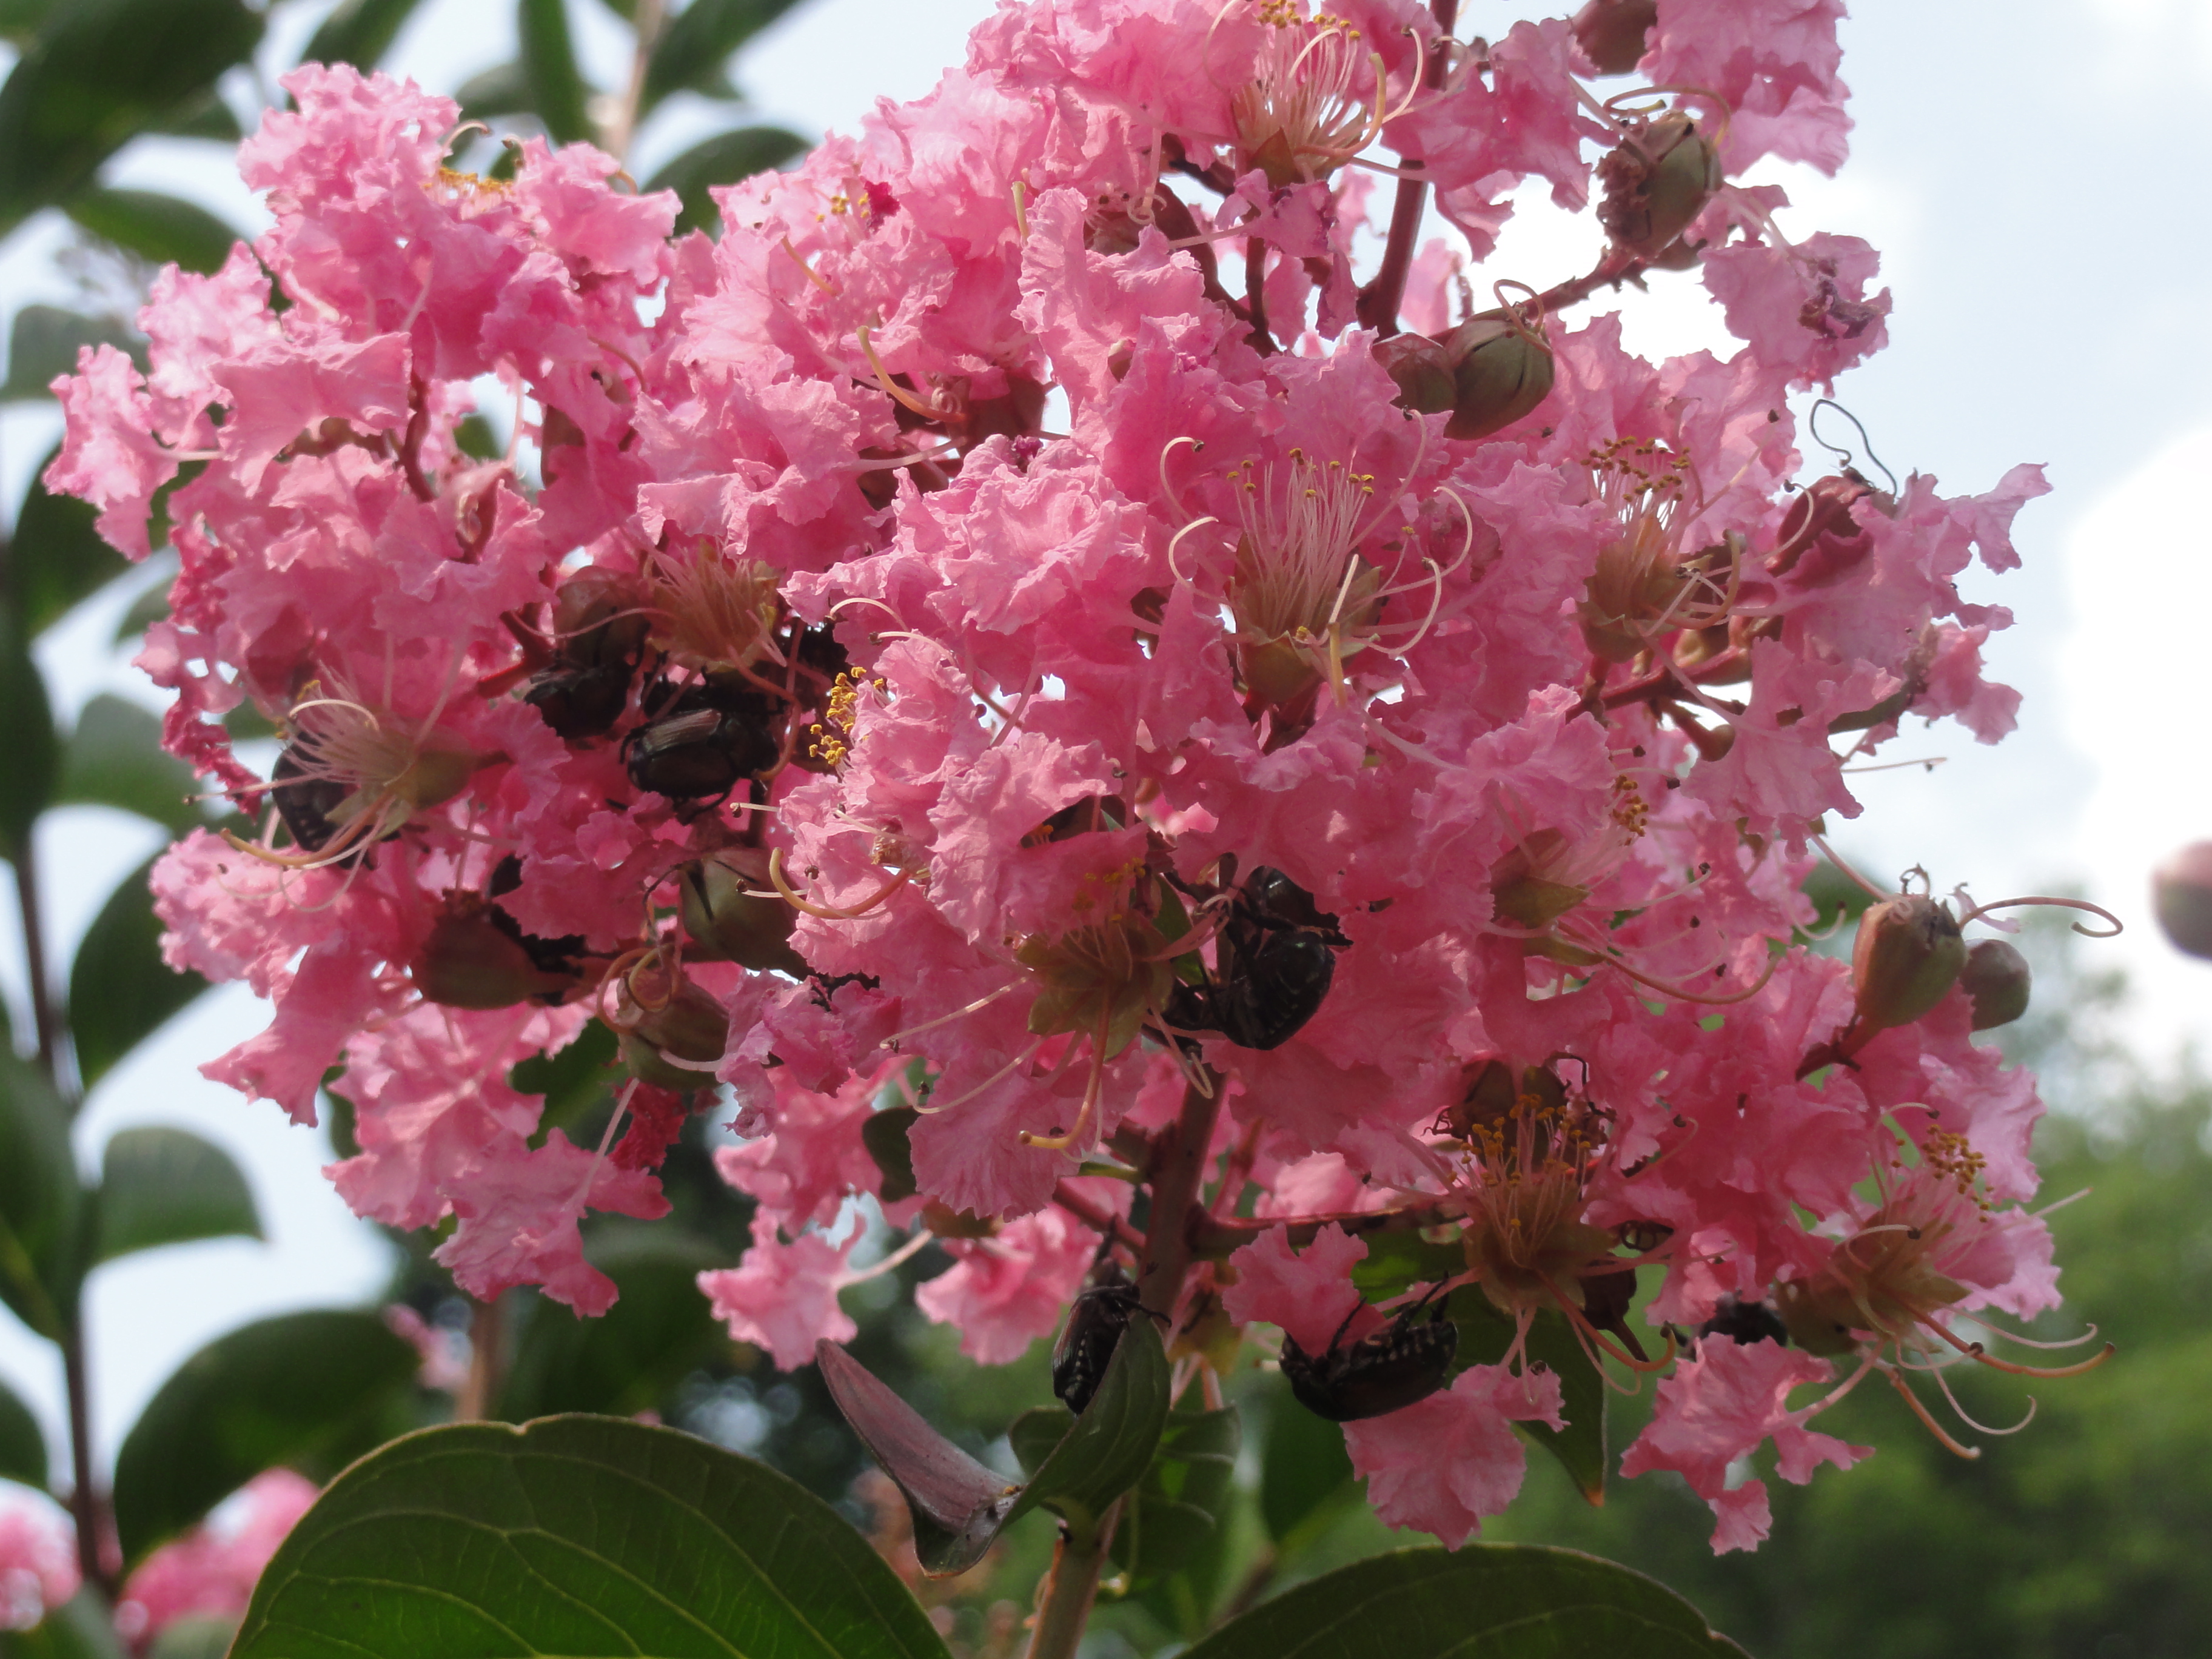 Crapemyrtle flowers with Japanese Beetles